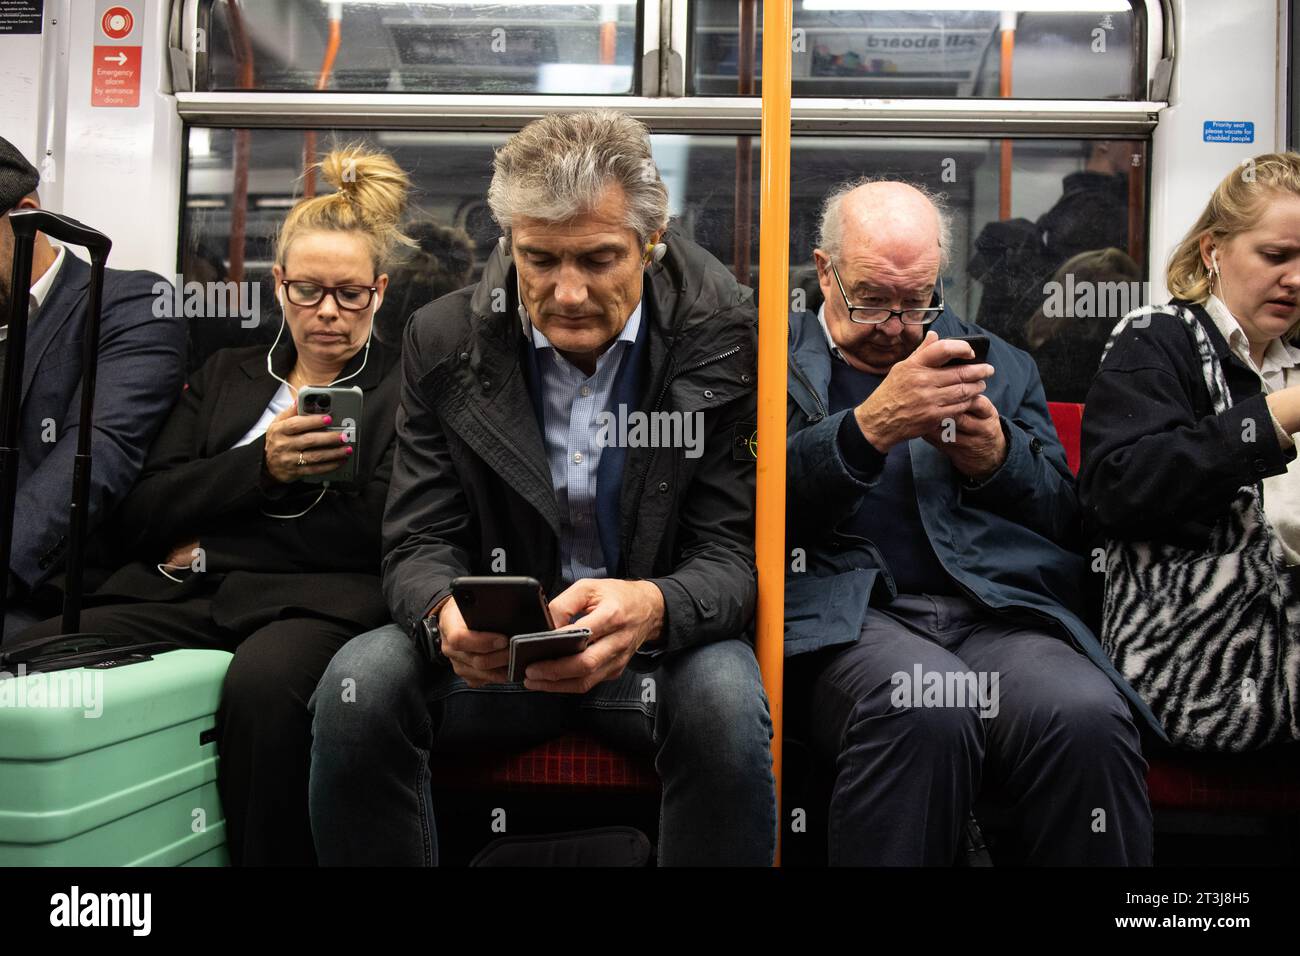 South Western Rail commuters crammed onto seating surfing their smartphones during rush hour on a train out of London Waterloo main station. Stock Photo